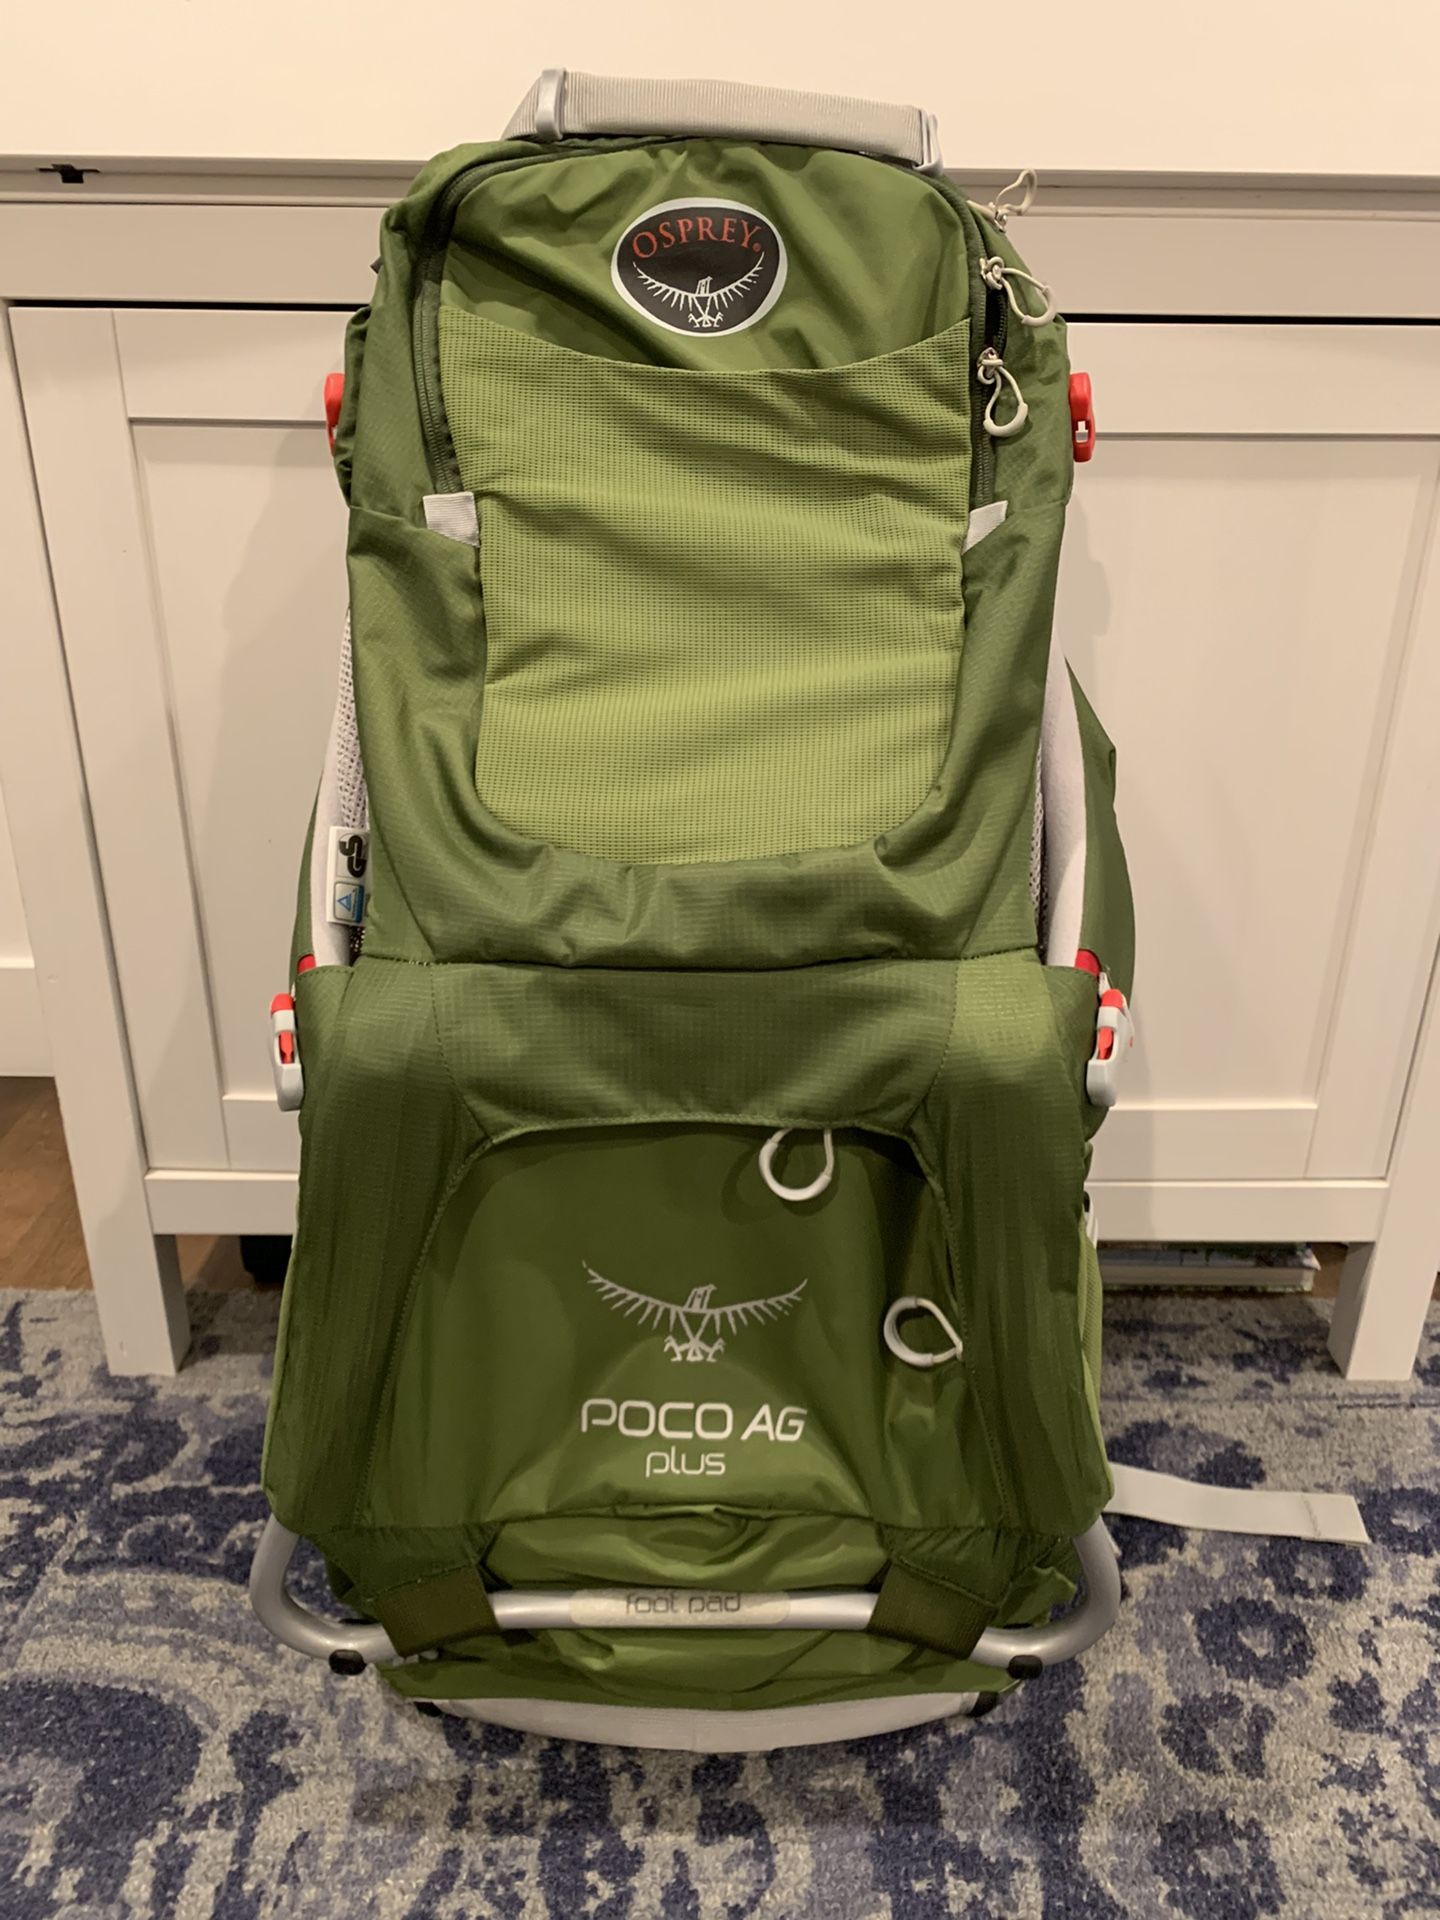 Osprey Poco AG Plus Hiking Backpack (with Carrying Case)